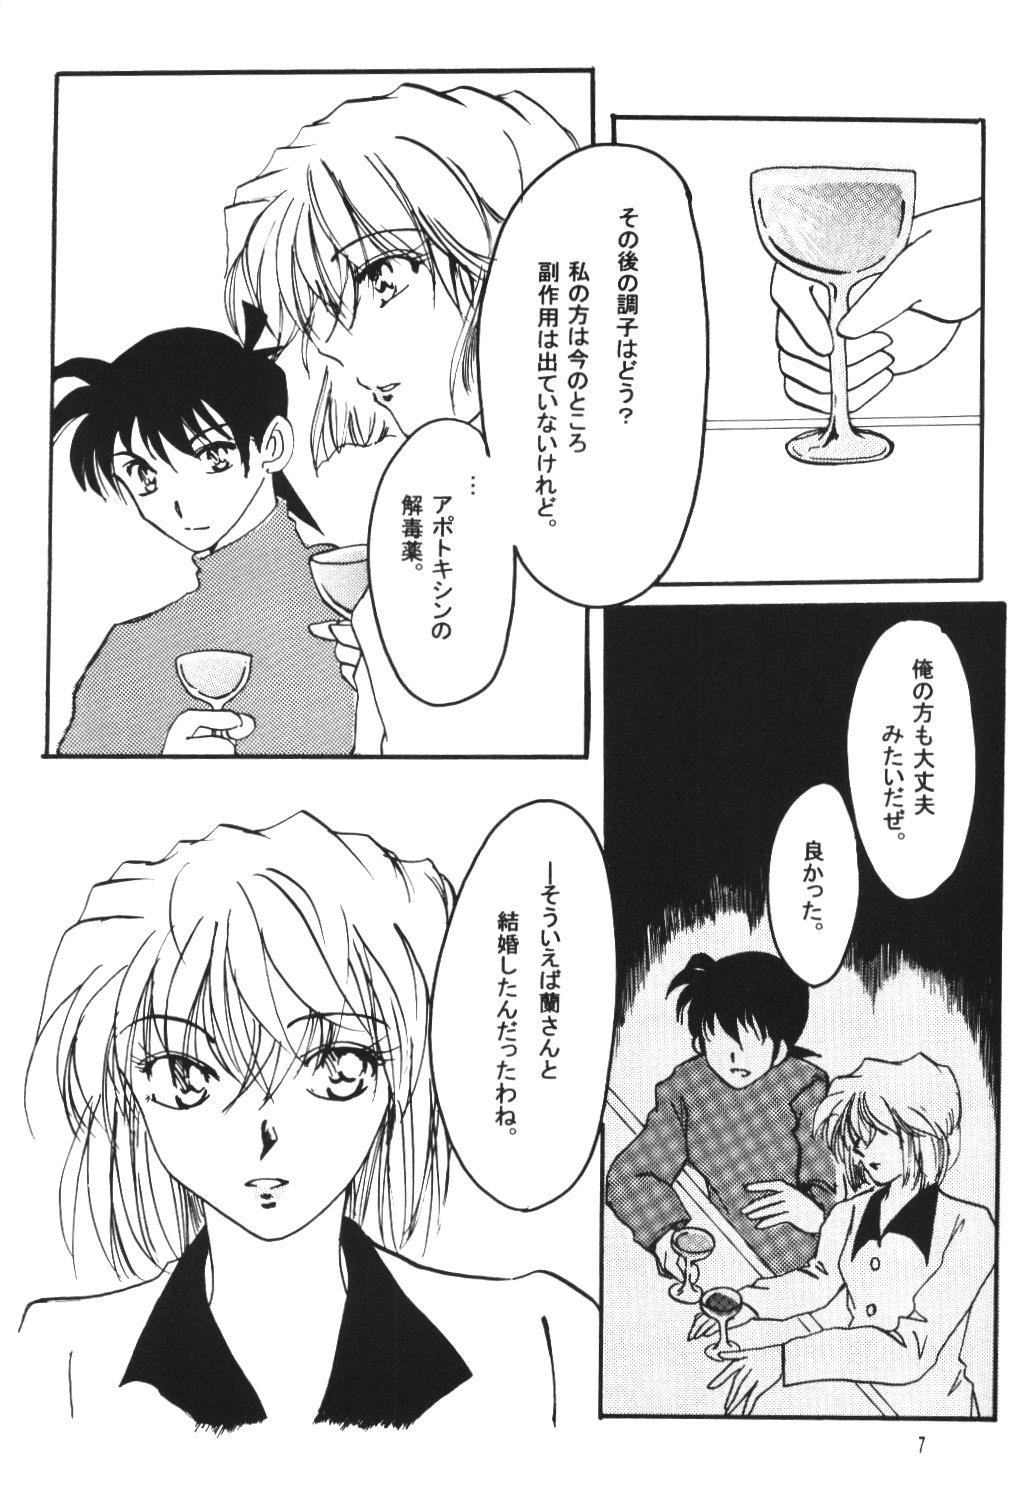 She Over Drive - Detective conan Salope - Page 6